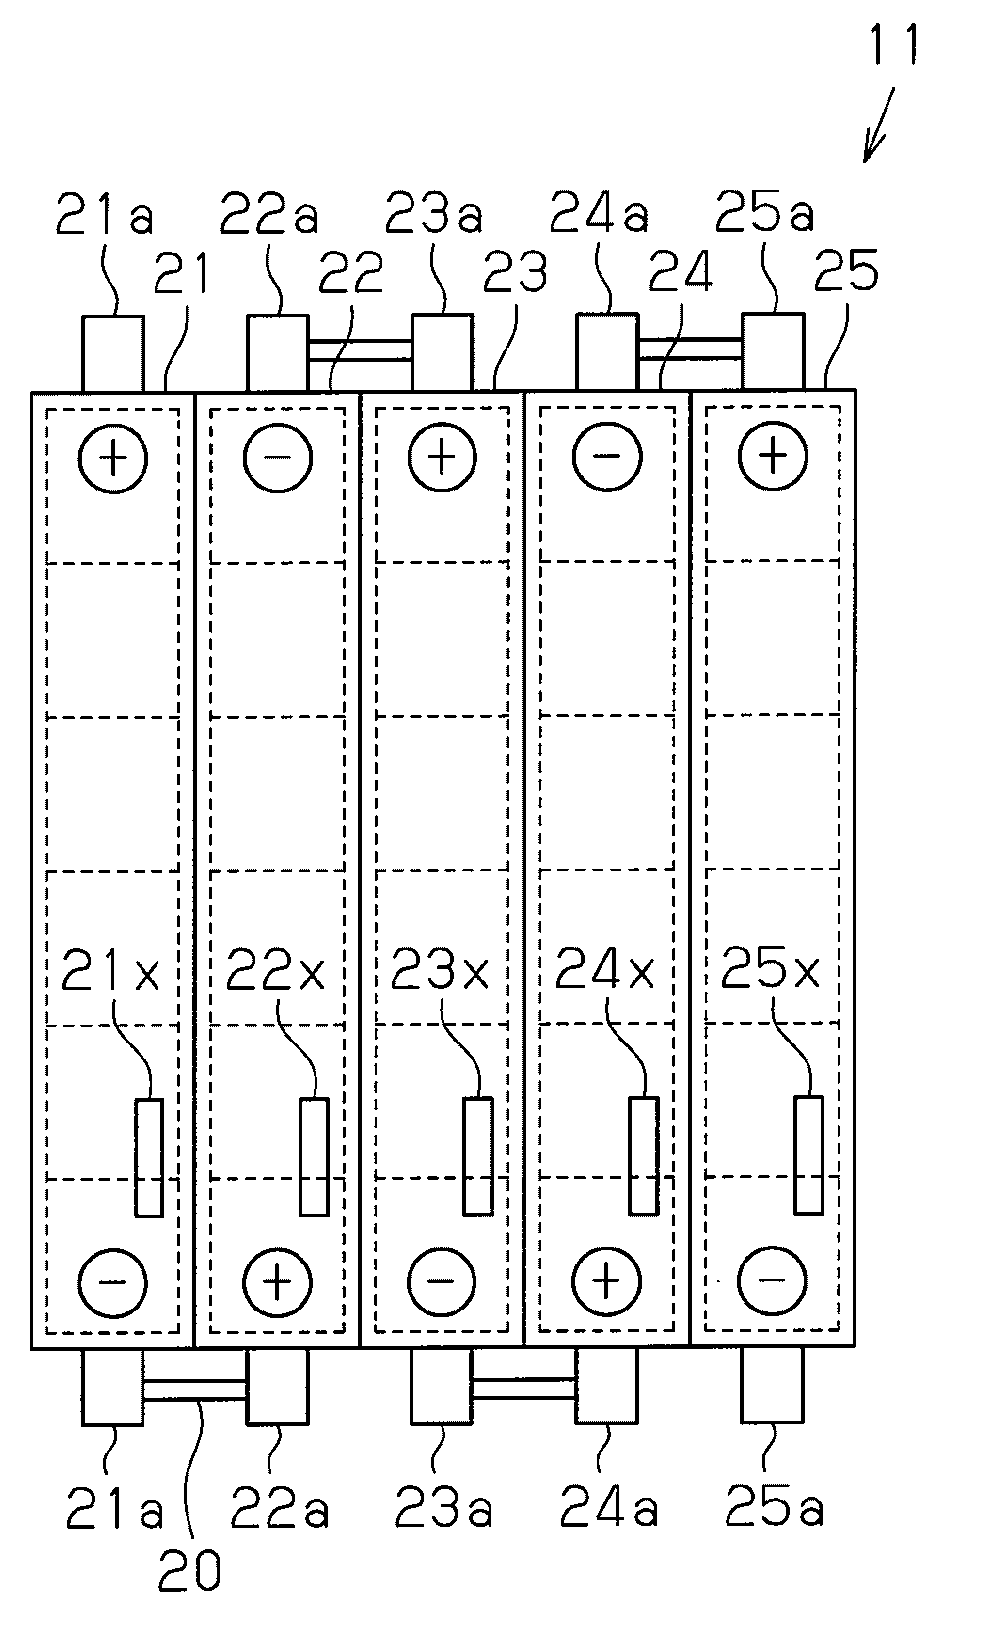 Method of reusing rechargeable battery